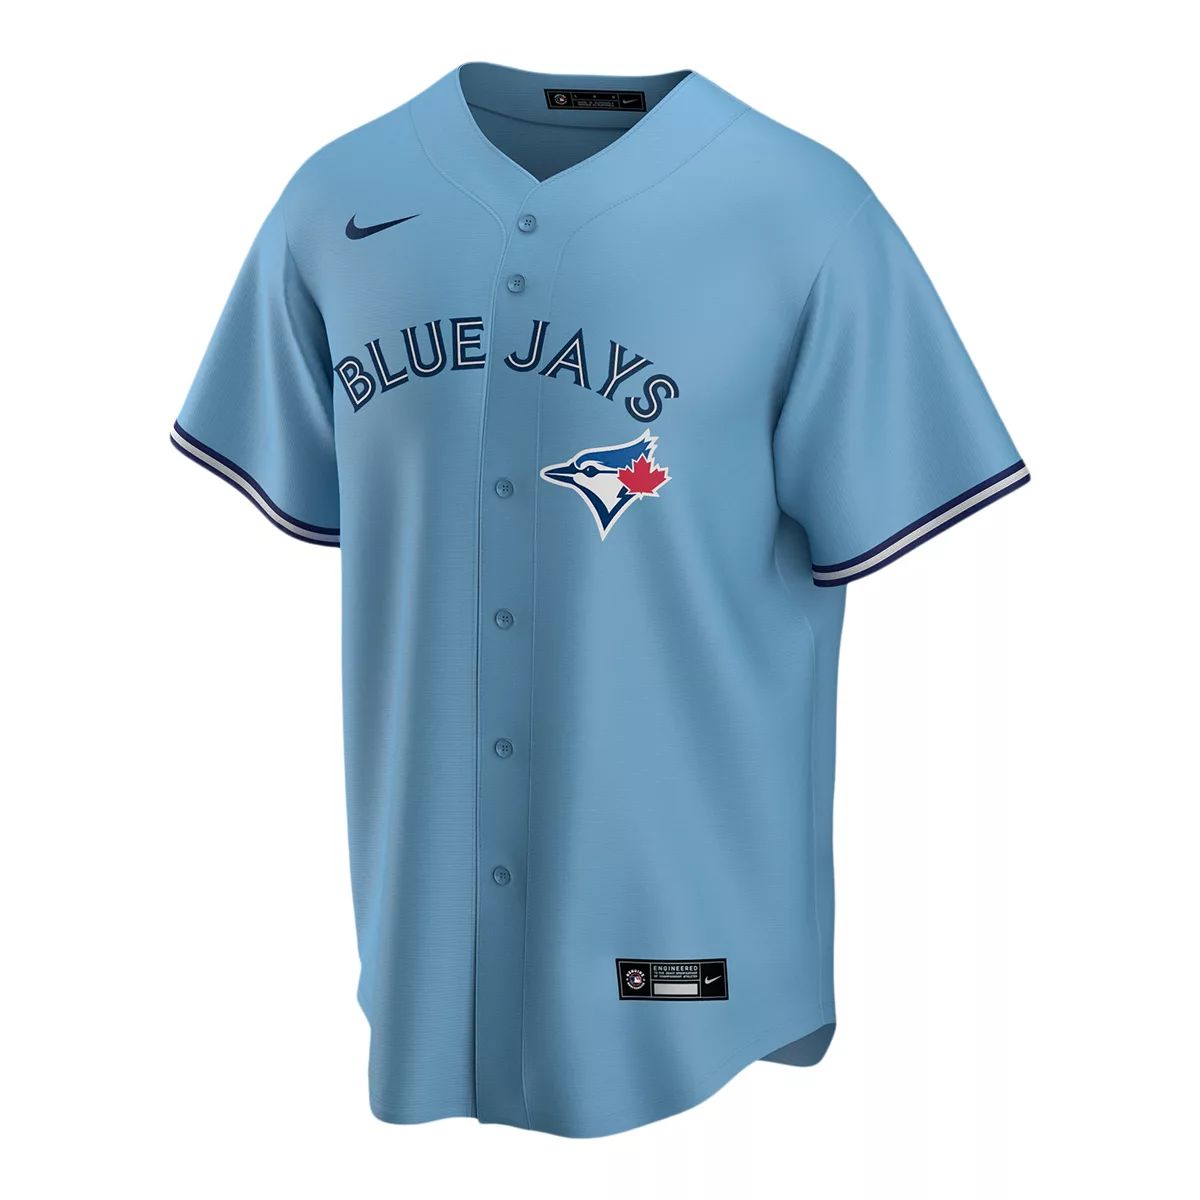 Majestic Official MLB Authentic Toronto Blue Jays Youth Medium Licensed  Replica Jersey Tee : Sports & Outdoors 